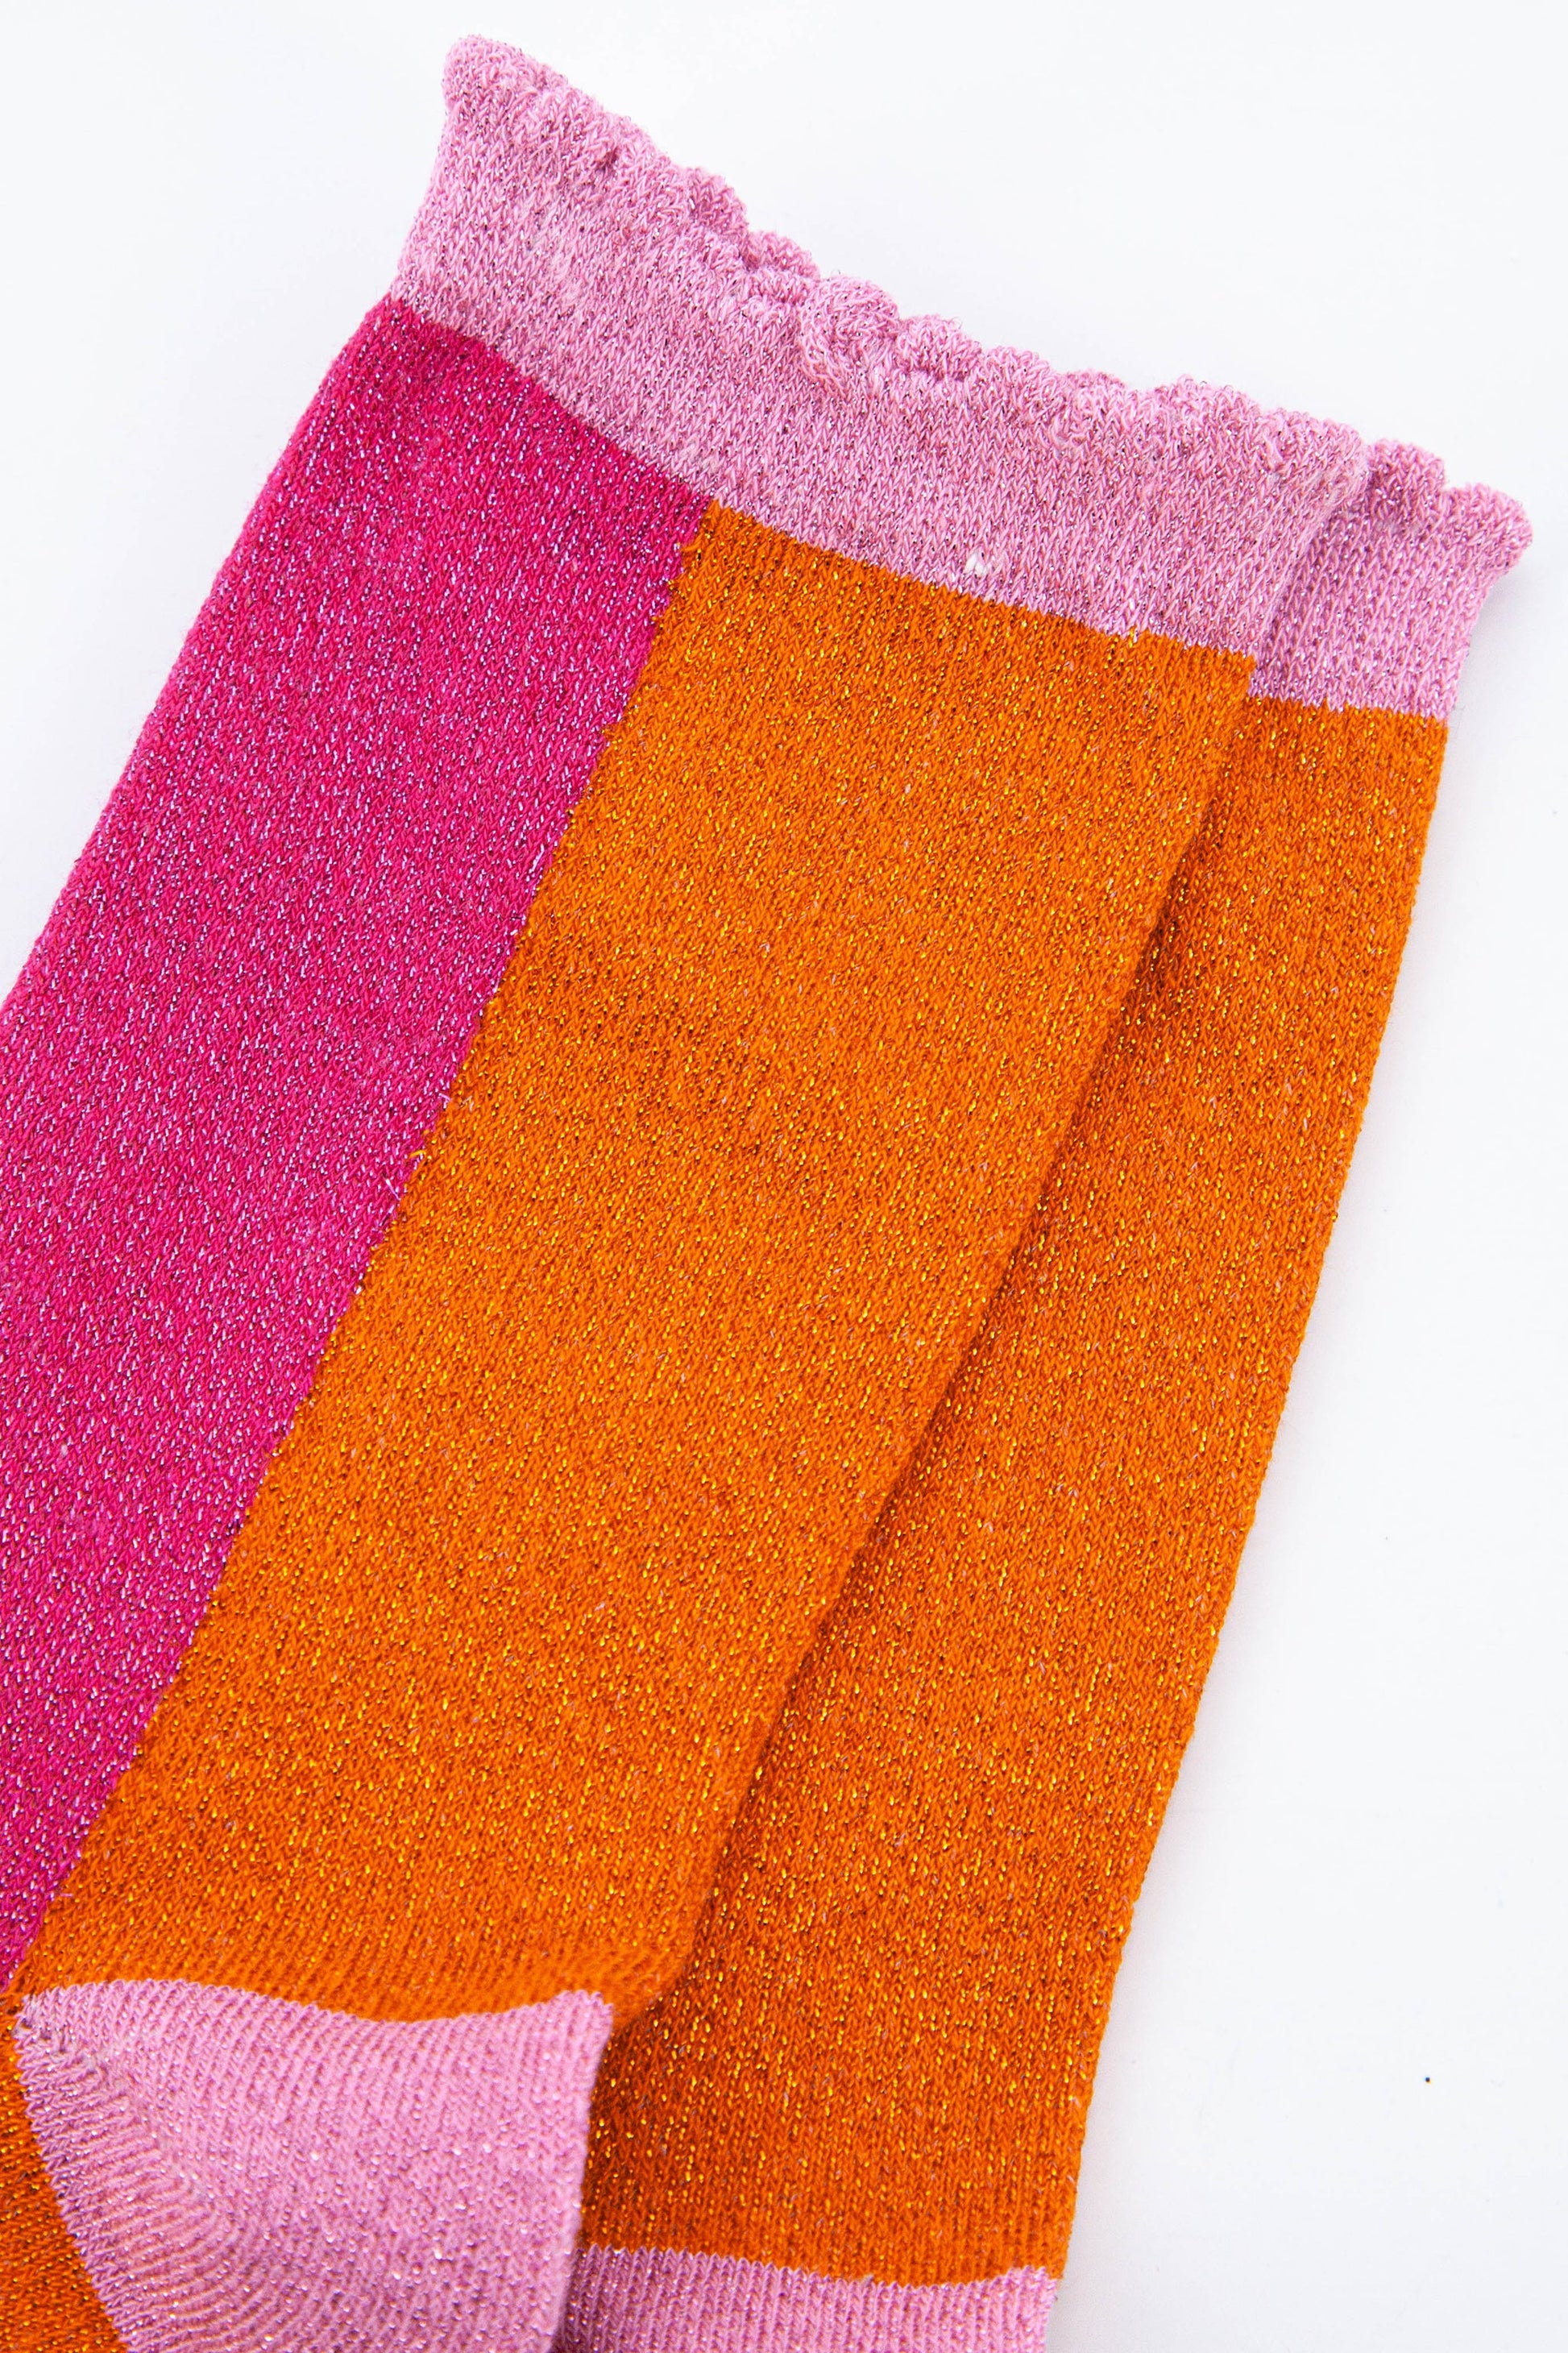 close up of the sparkly material and pink scalloped top on these ladies cotton socks